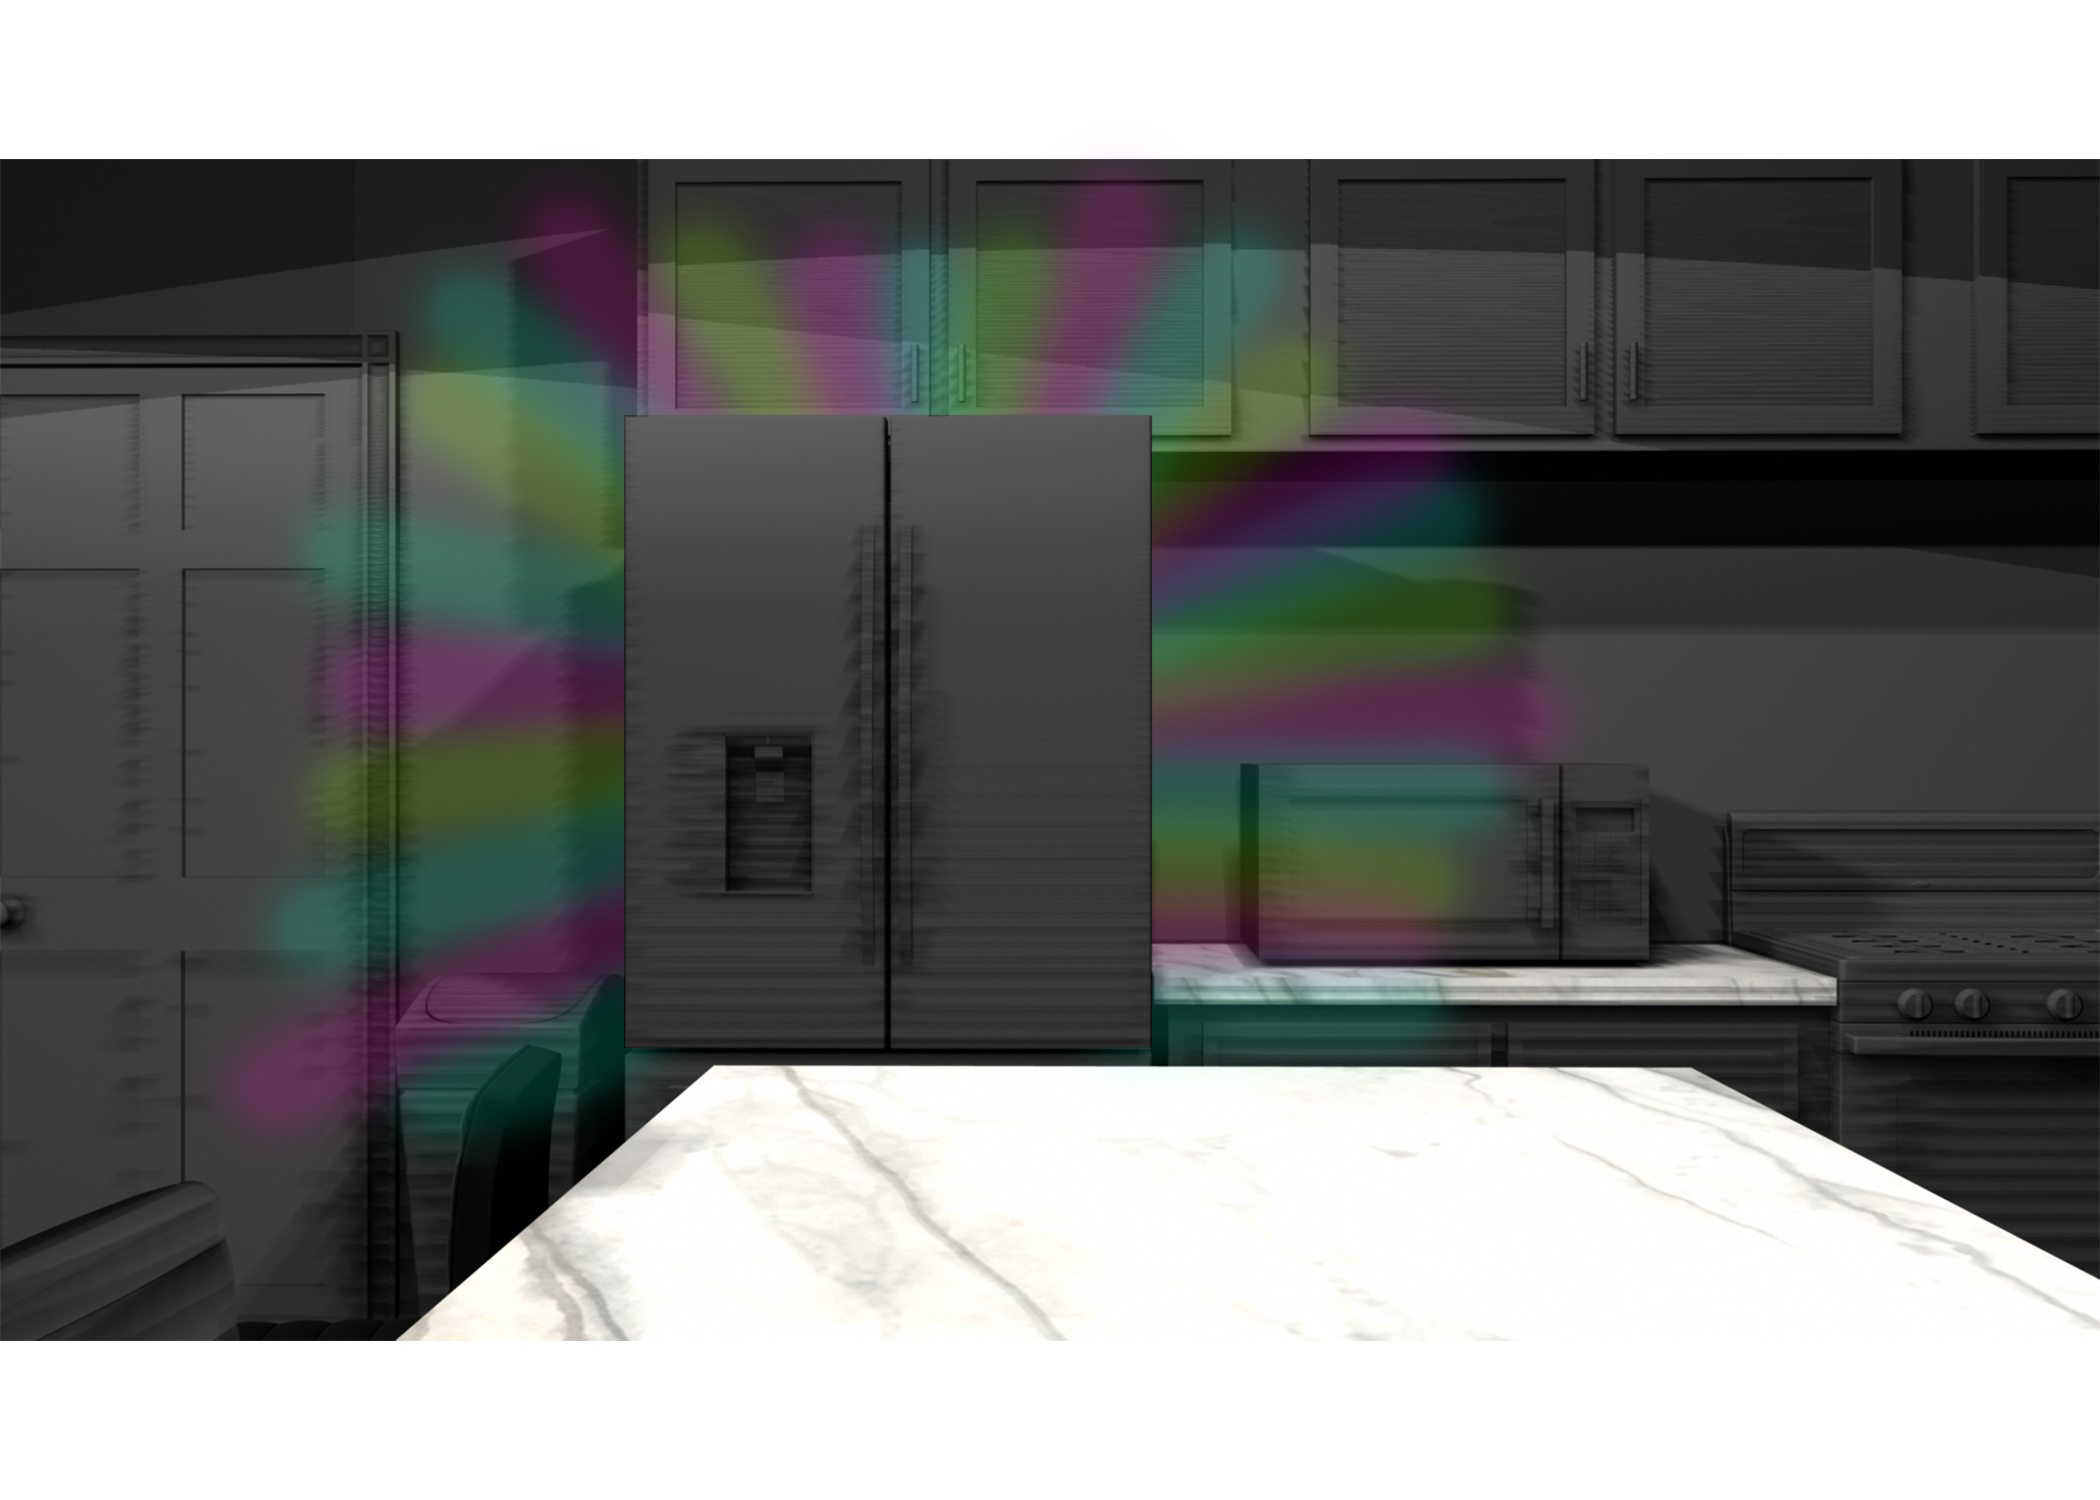 3D rendered image of a refrigerator with disco lights eminating from behind its doors